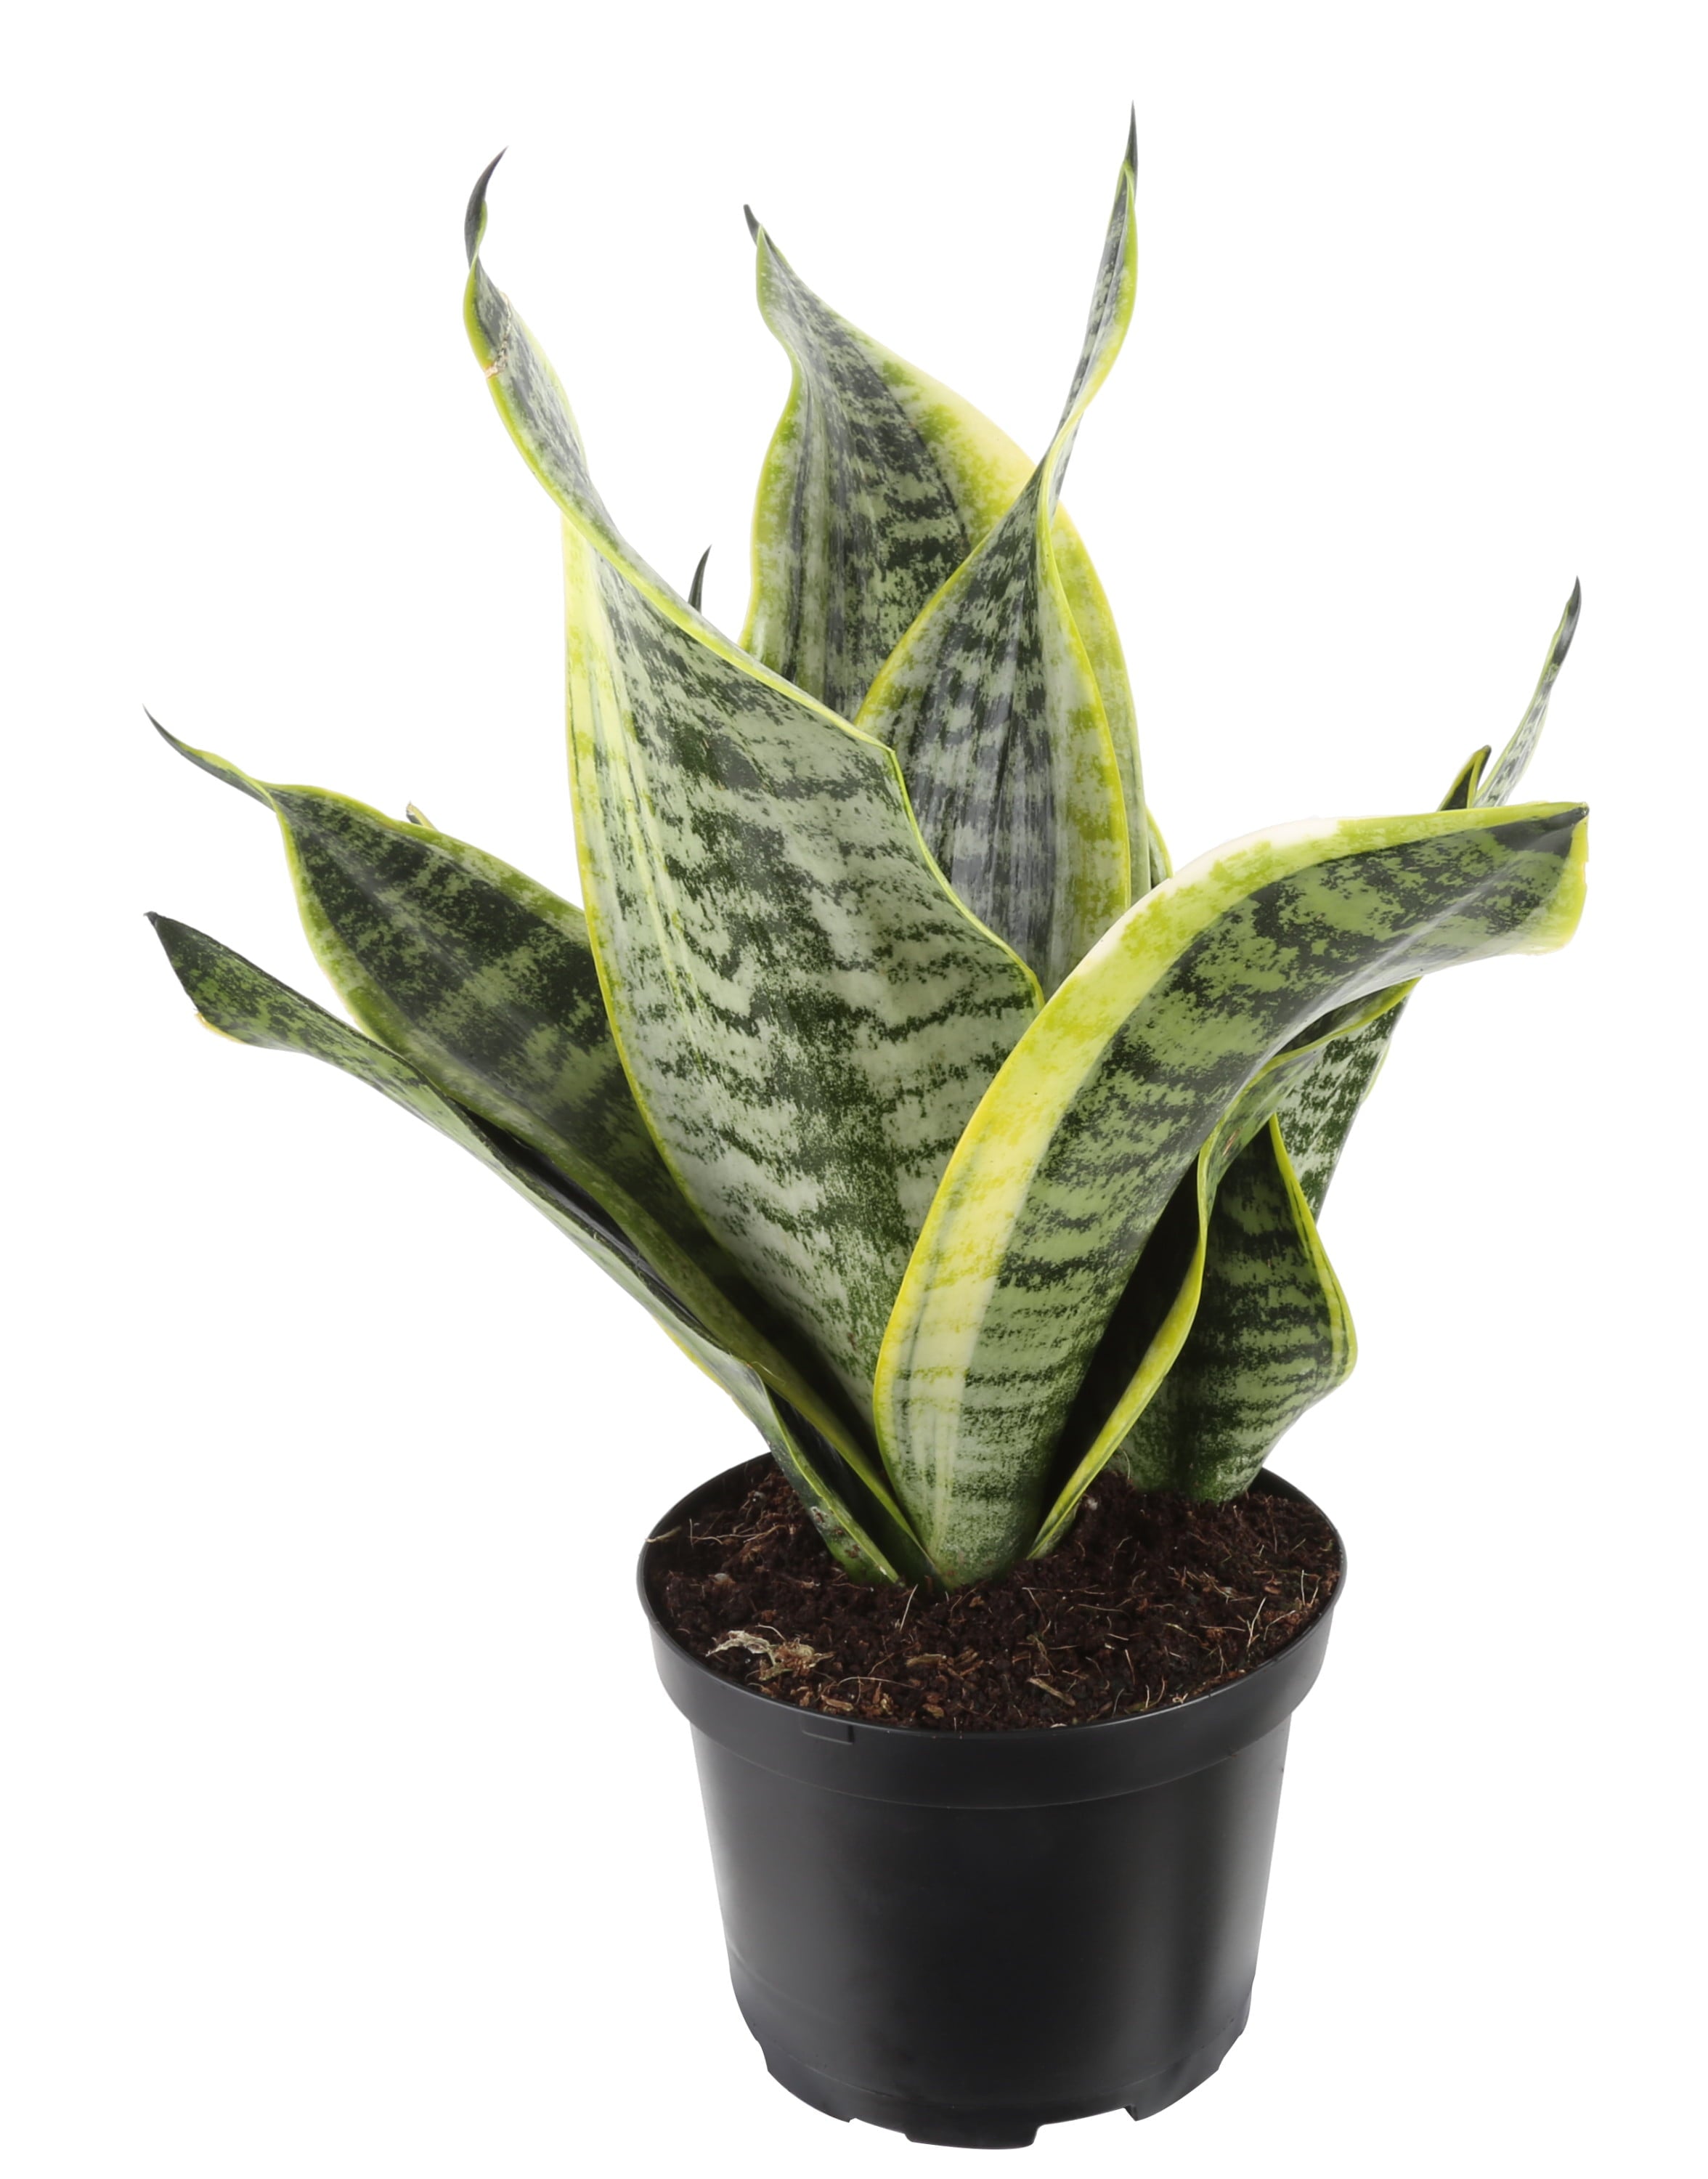 Costa Farms  Live Indoor 23in. Tall Green Snake Plant; Medium， Indirect Light Plant in 6in. Grower Pot